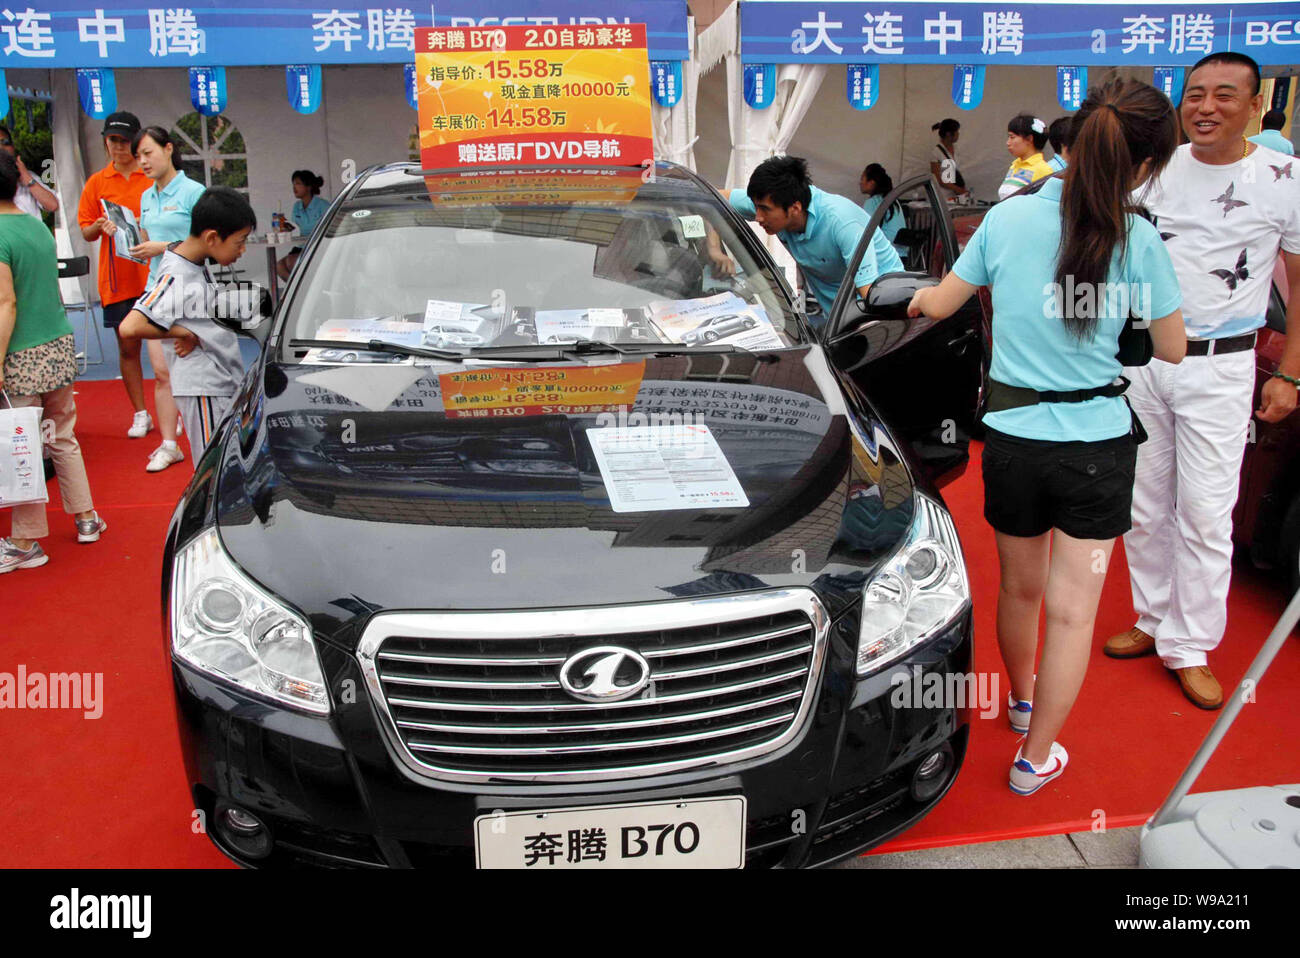 --FILE--Visitors look at an FAW Besturn B70 during an auto show in Dalian city, northeast Chinas Liaoning province, 19 August 2010.   FAW Group, the p Stock Photo